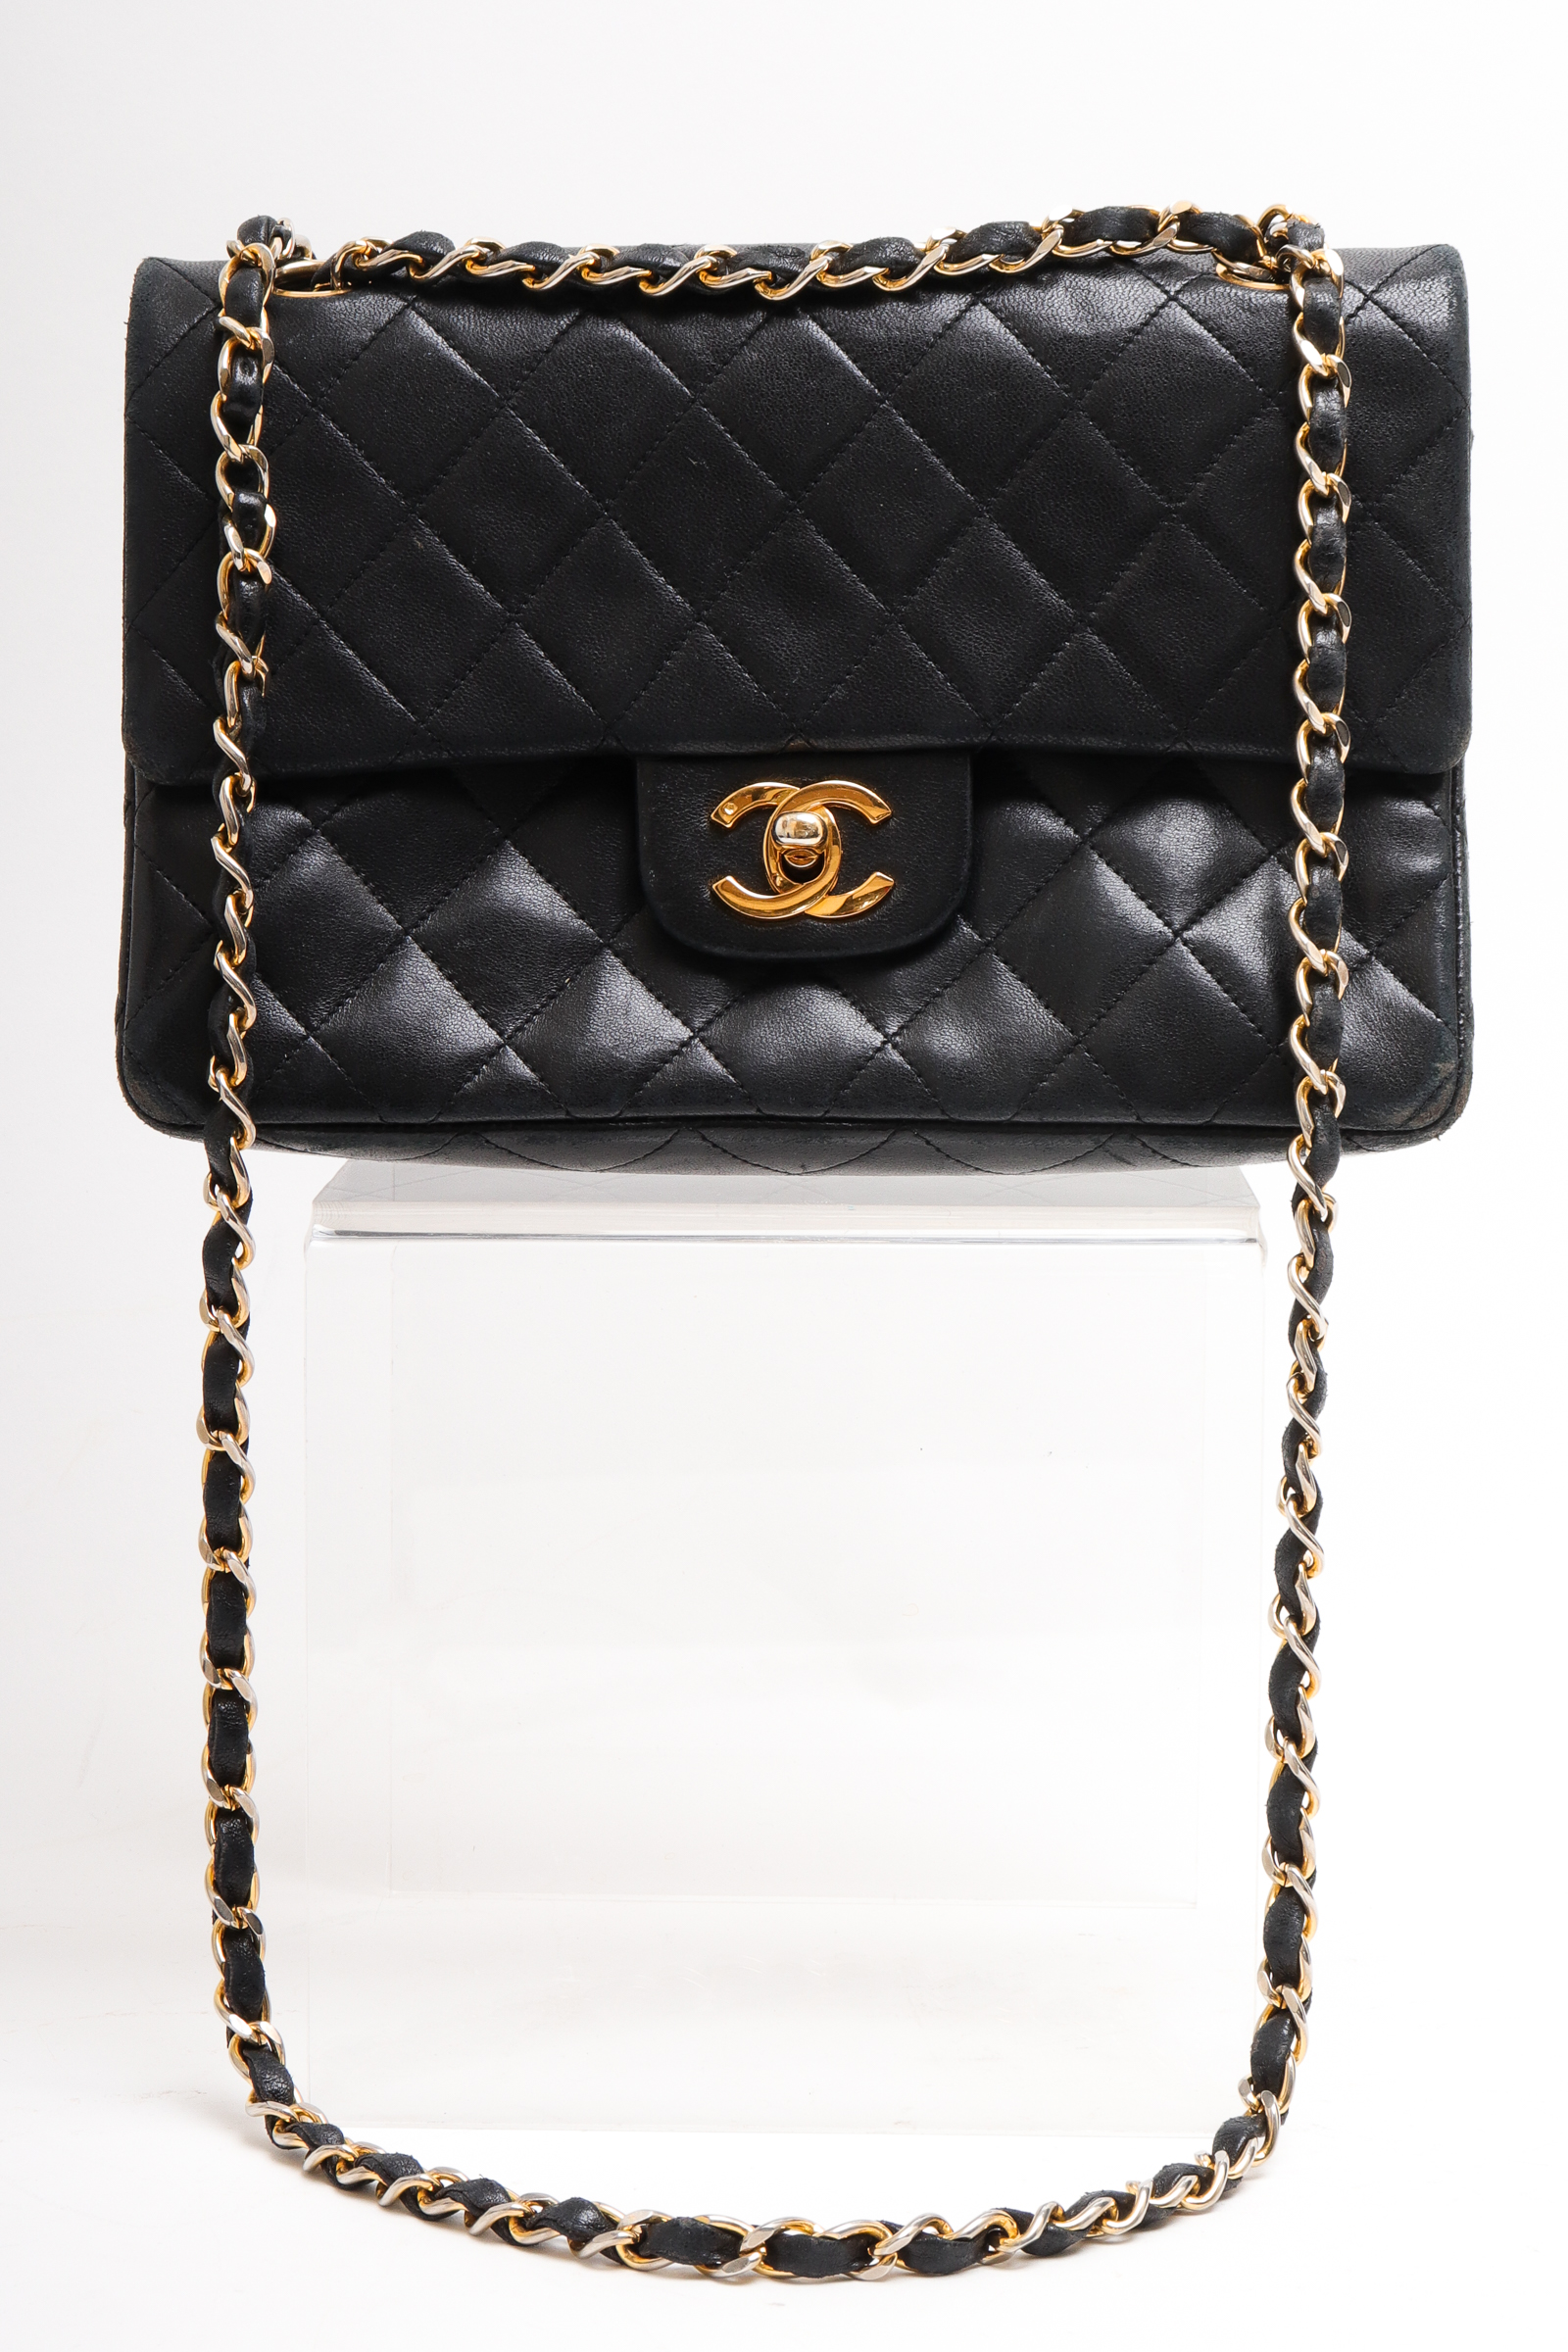 CHANEL VINTAGE BLACK QUILTED LEATHER 3c4763